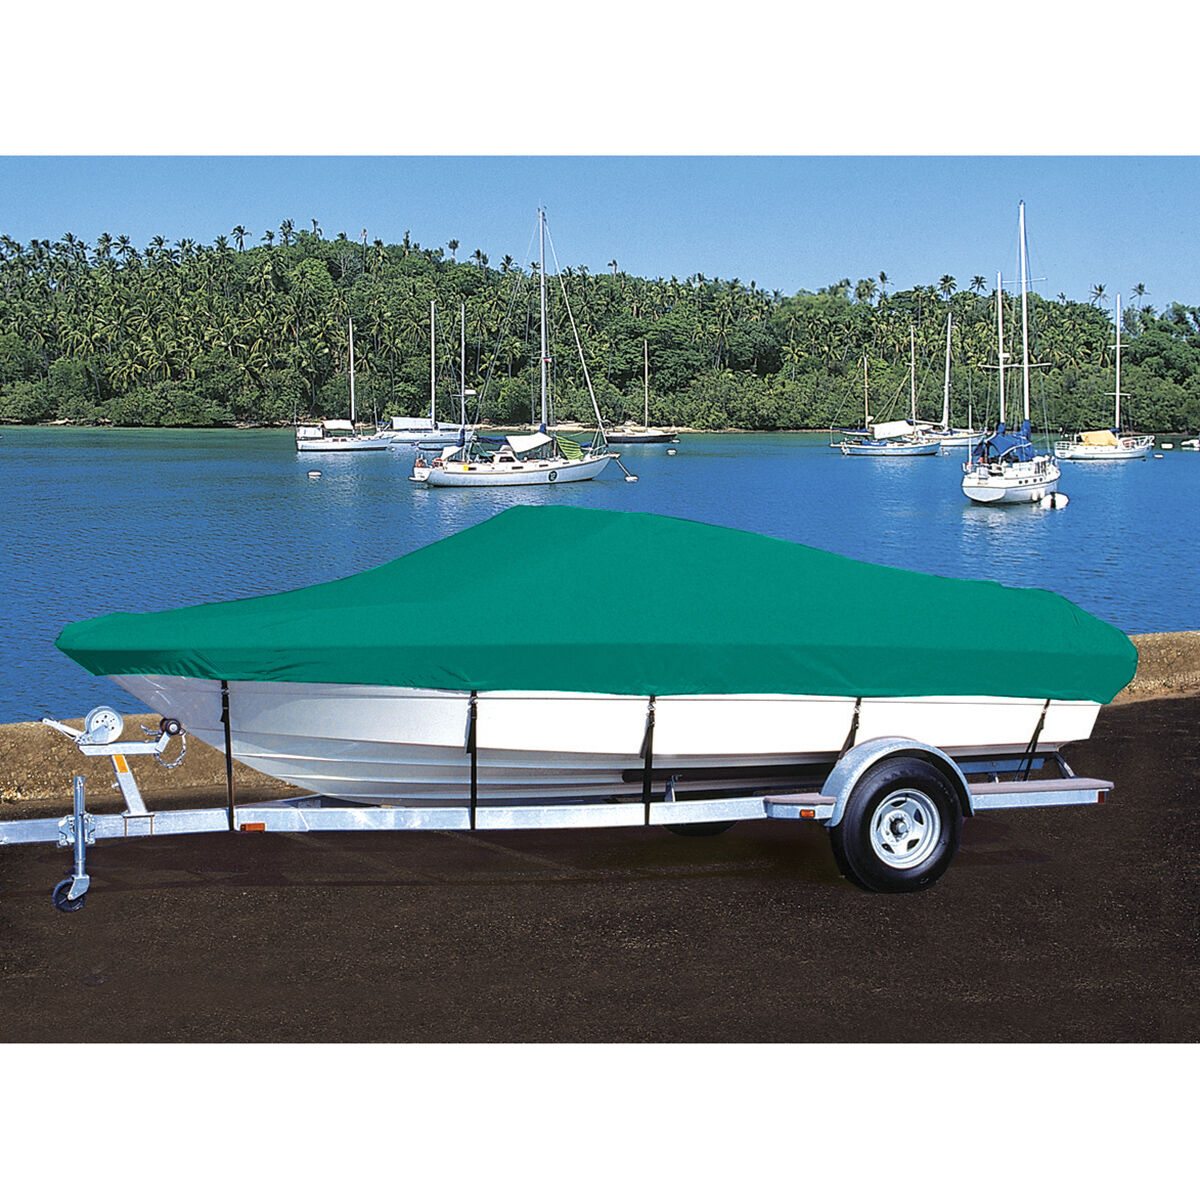 Taylor Made Trailerite Hot Shot Cover for 97-99 Larson 206 LXI Bow Rider I/O Boat Cover in Teal Polyester